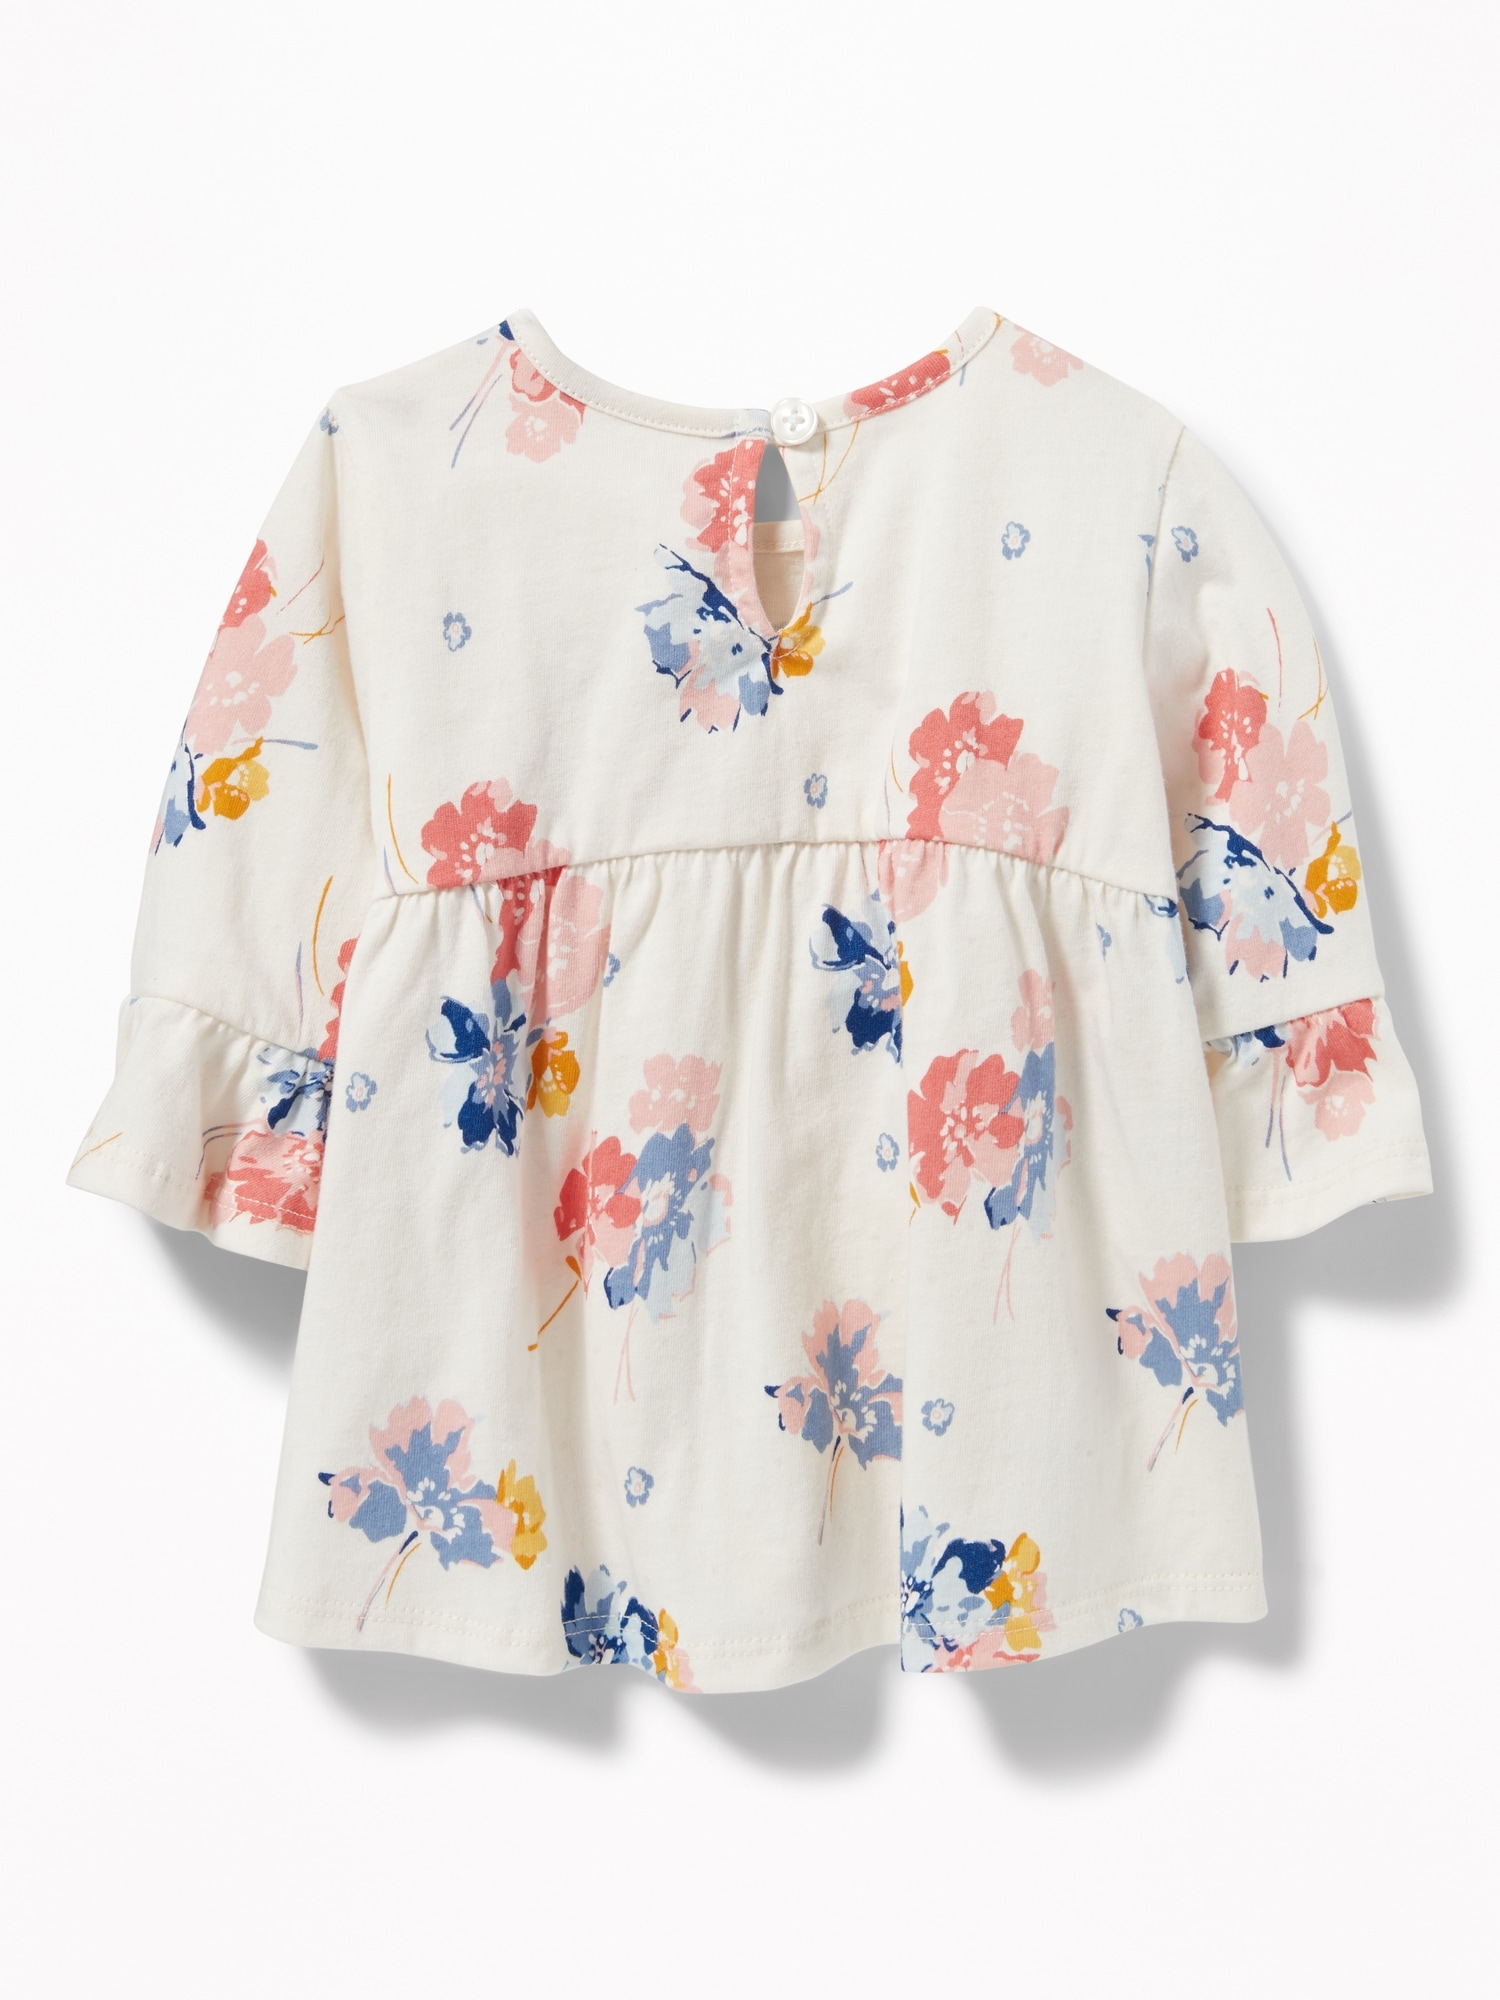 Ruffle-Trim Floral Jersey Top for Baby | Old Navy